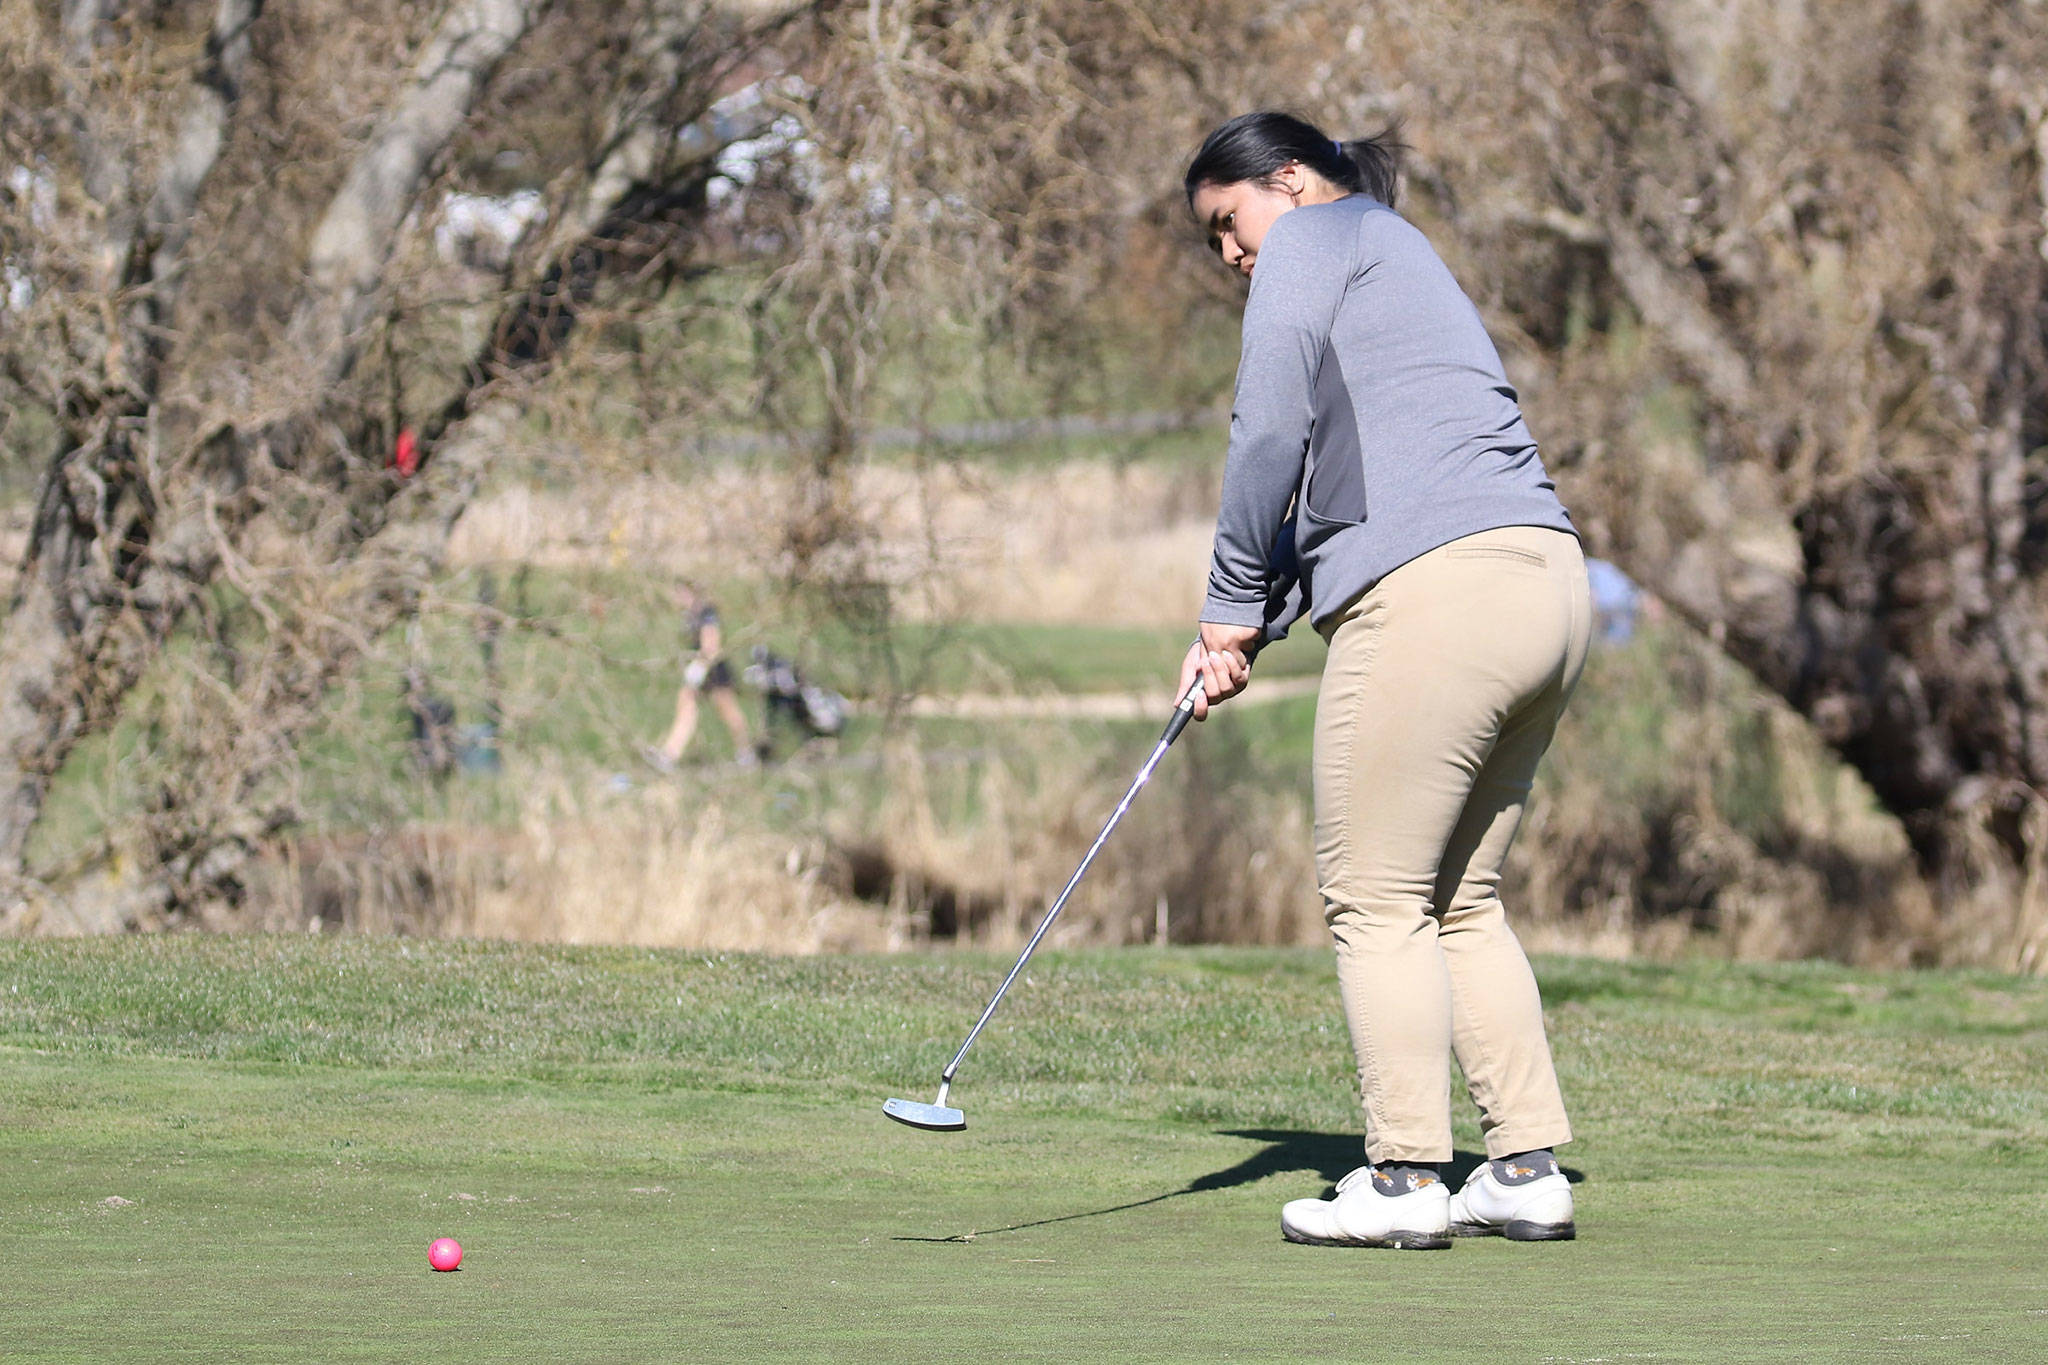 Oak Harbor’s Jenna Flores putts during the Whidbey Shootout Tuesday. (Photo by John Fisken)